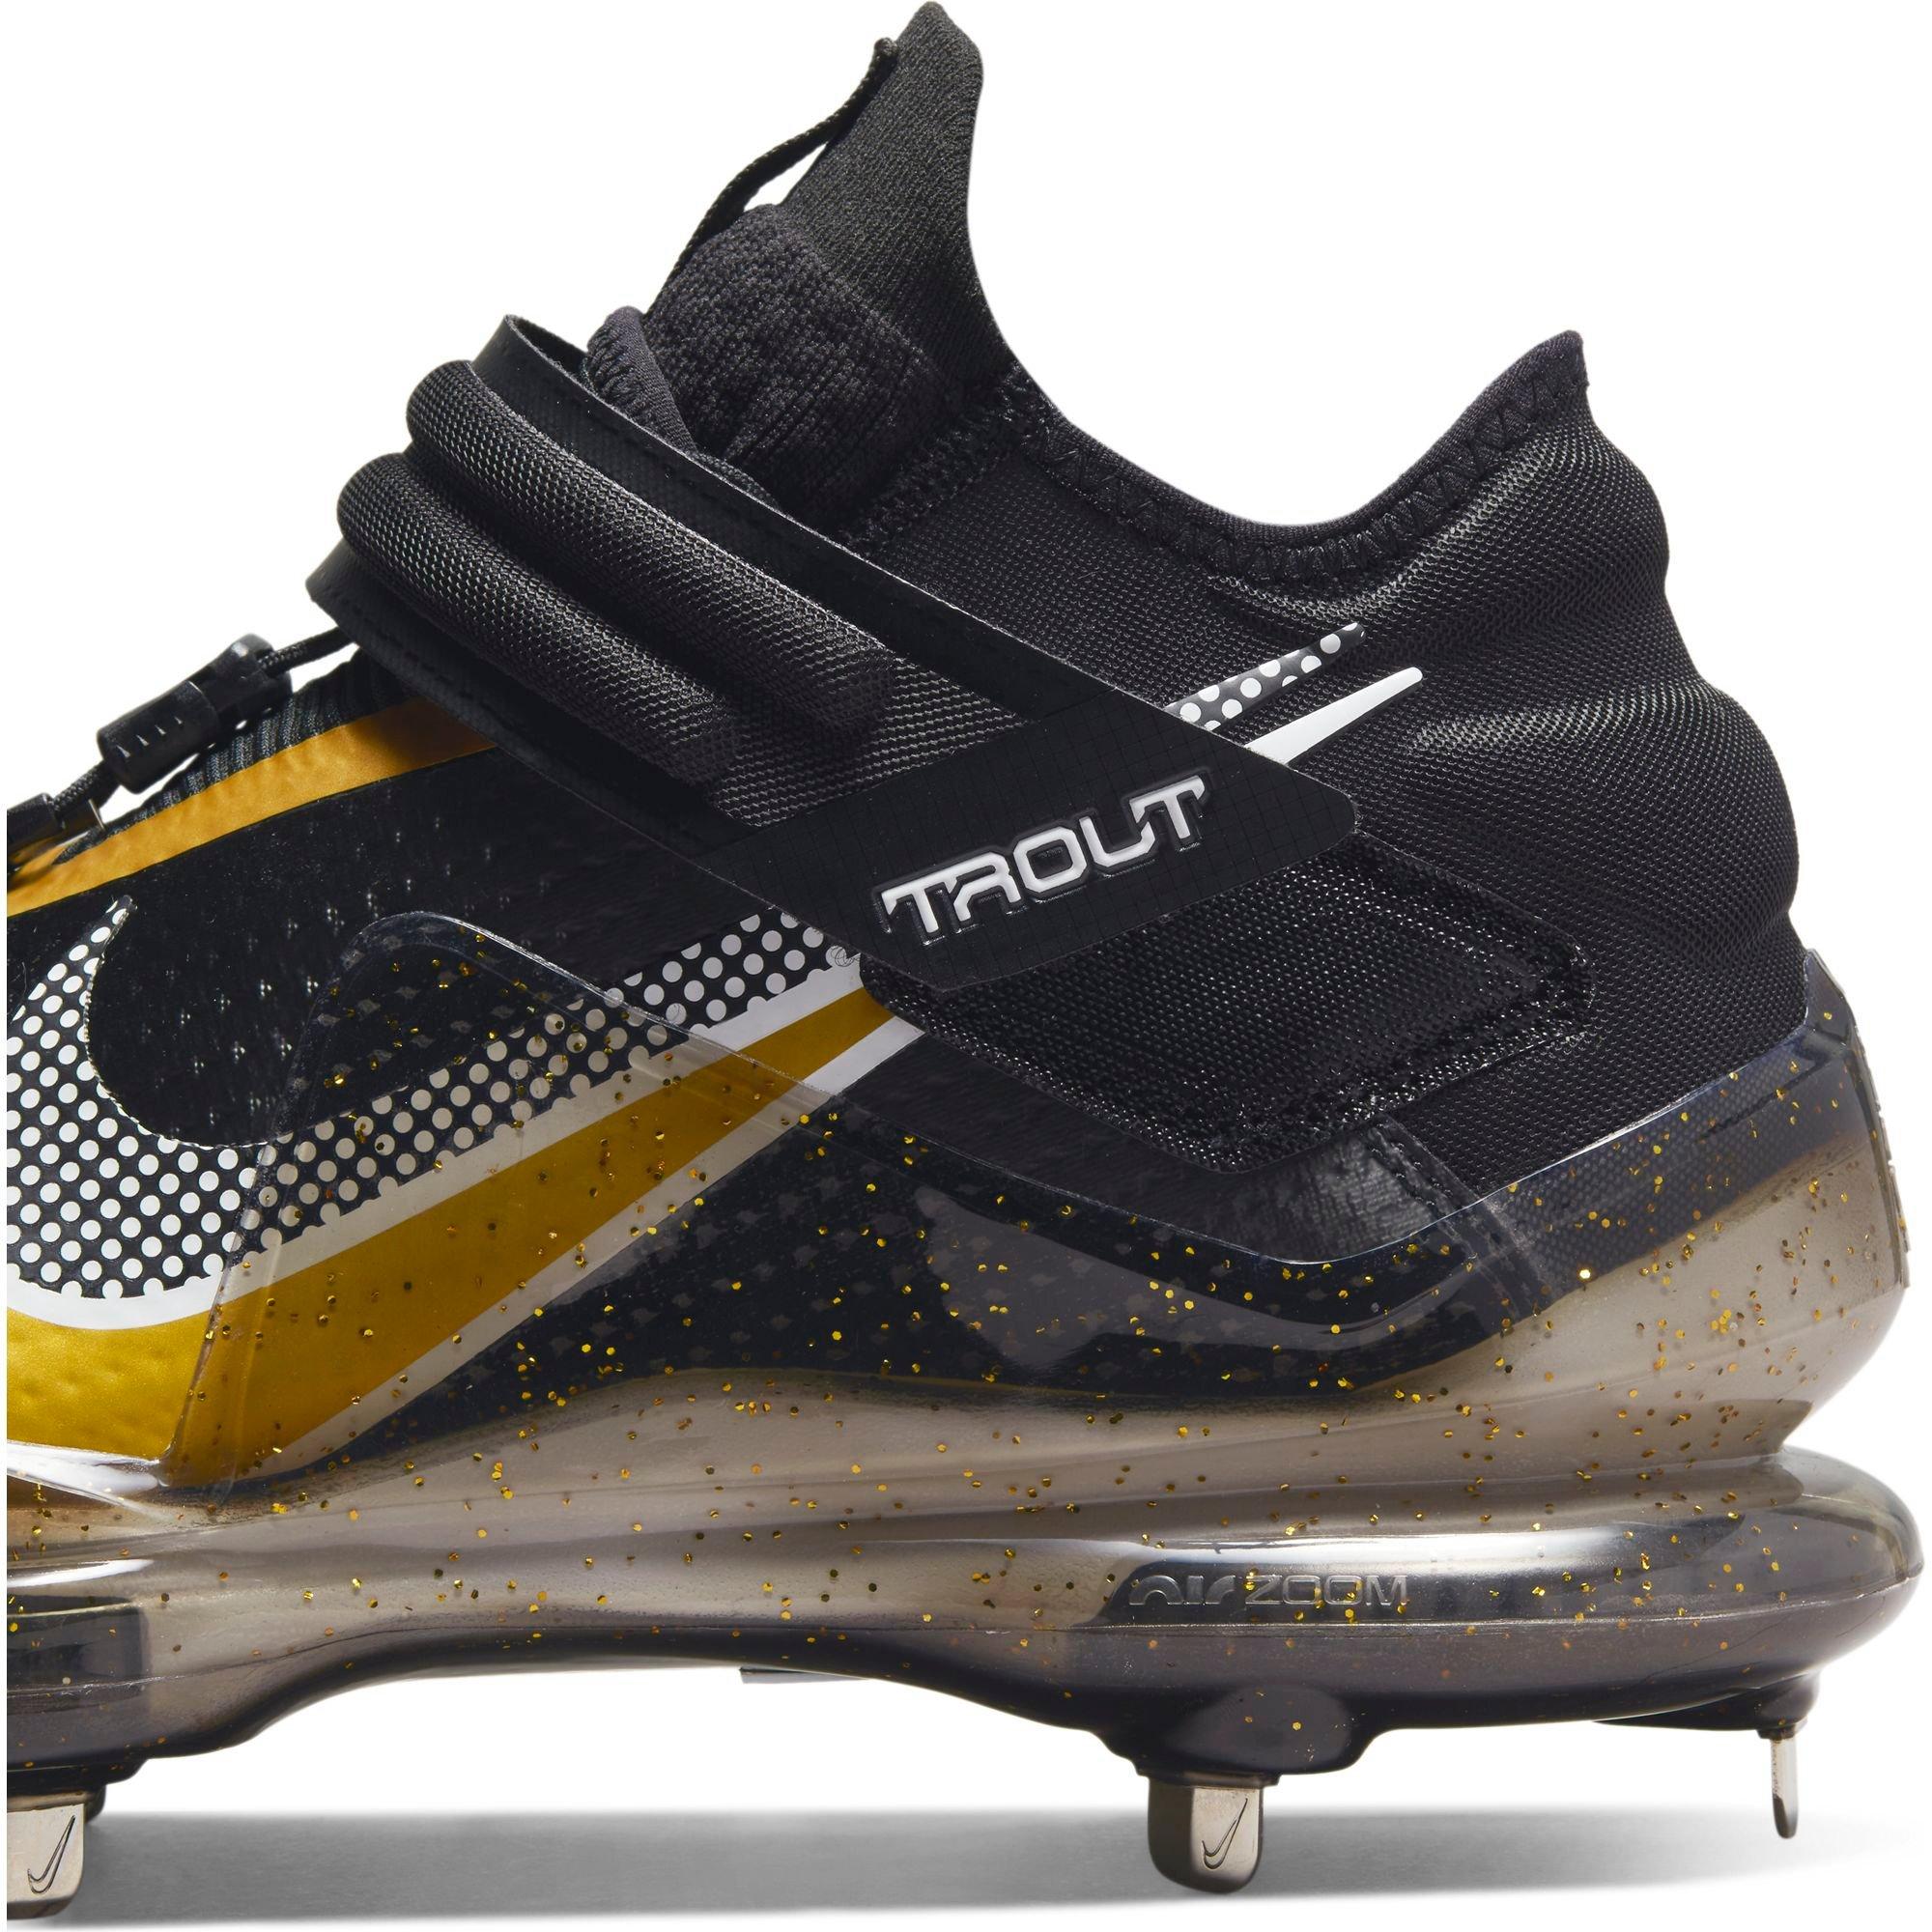 mike trout cleats, Off 73%